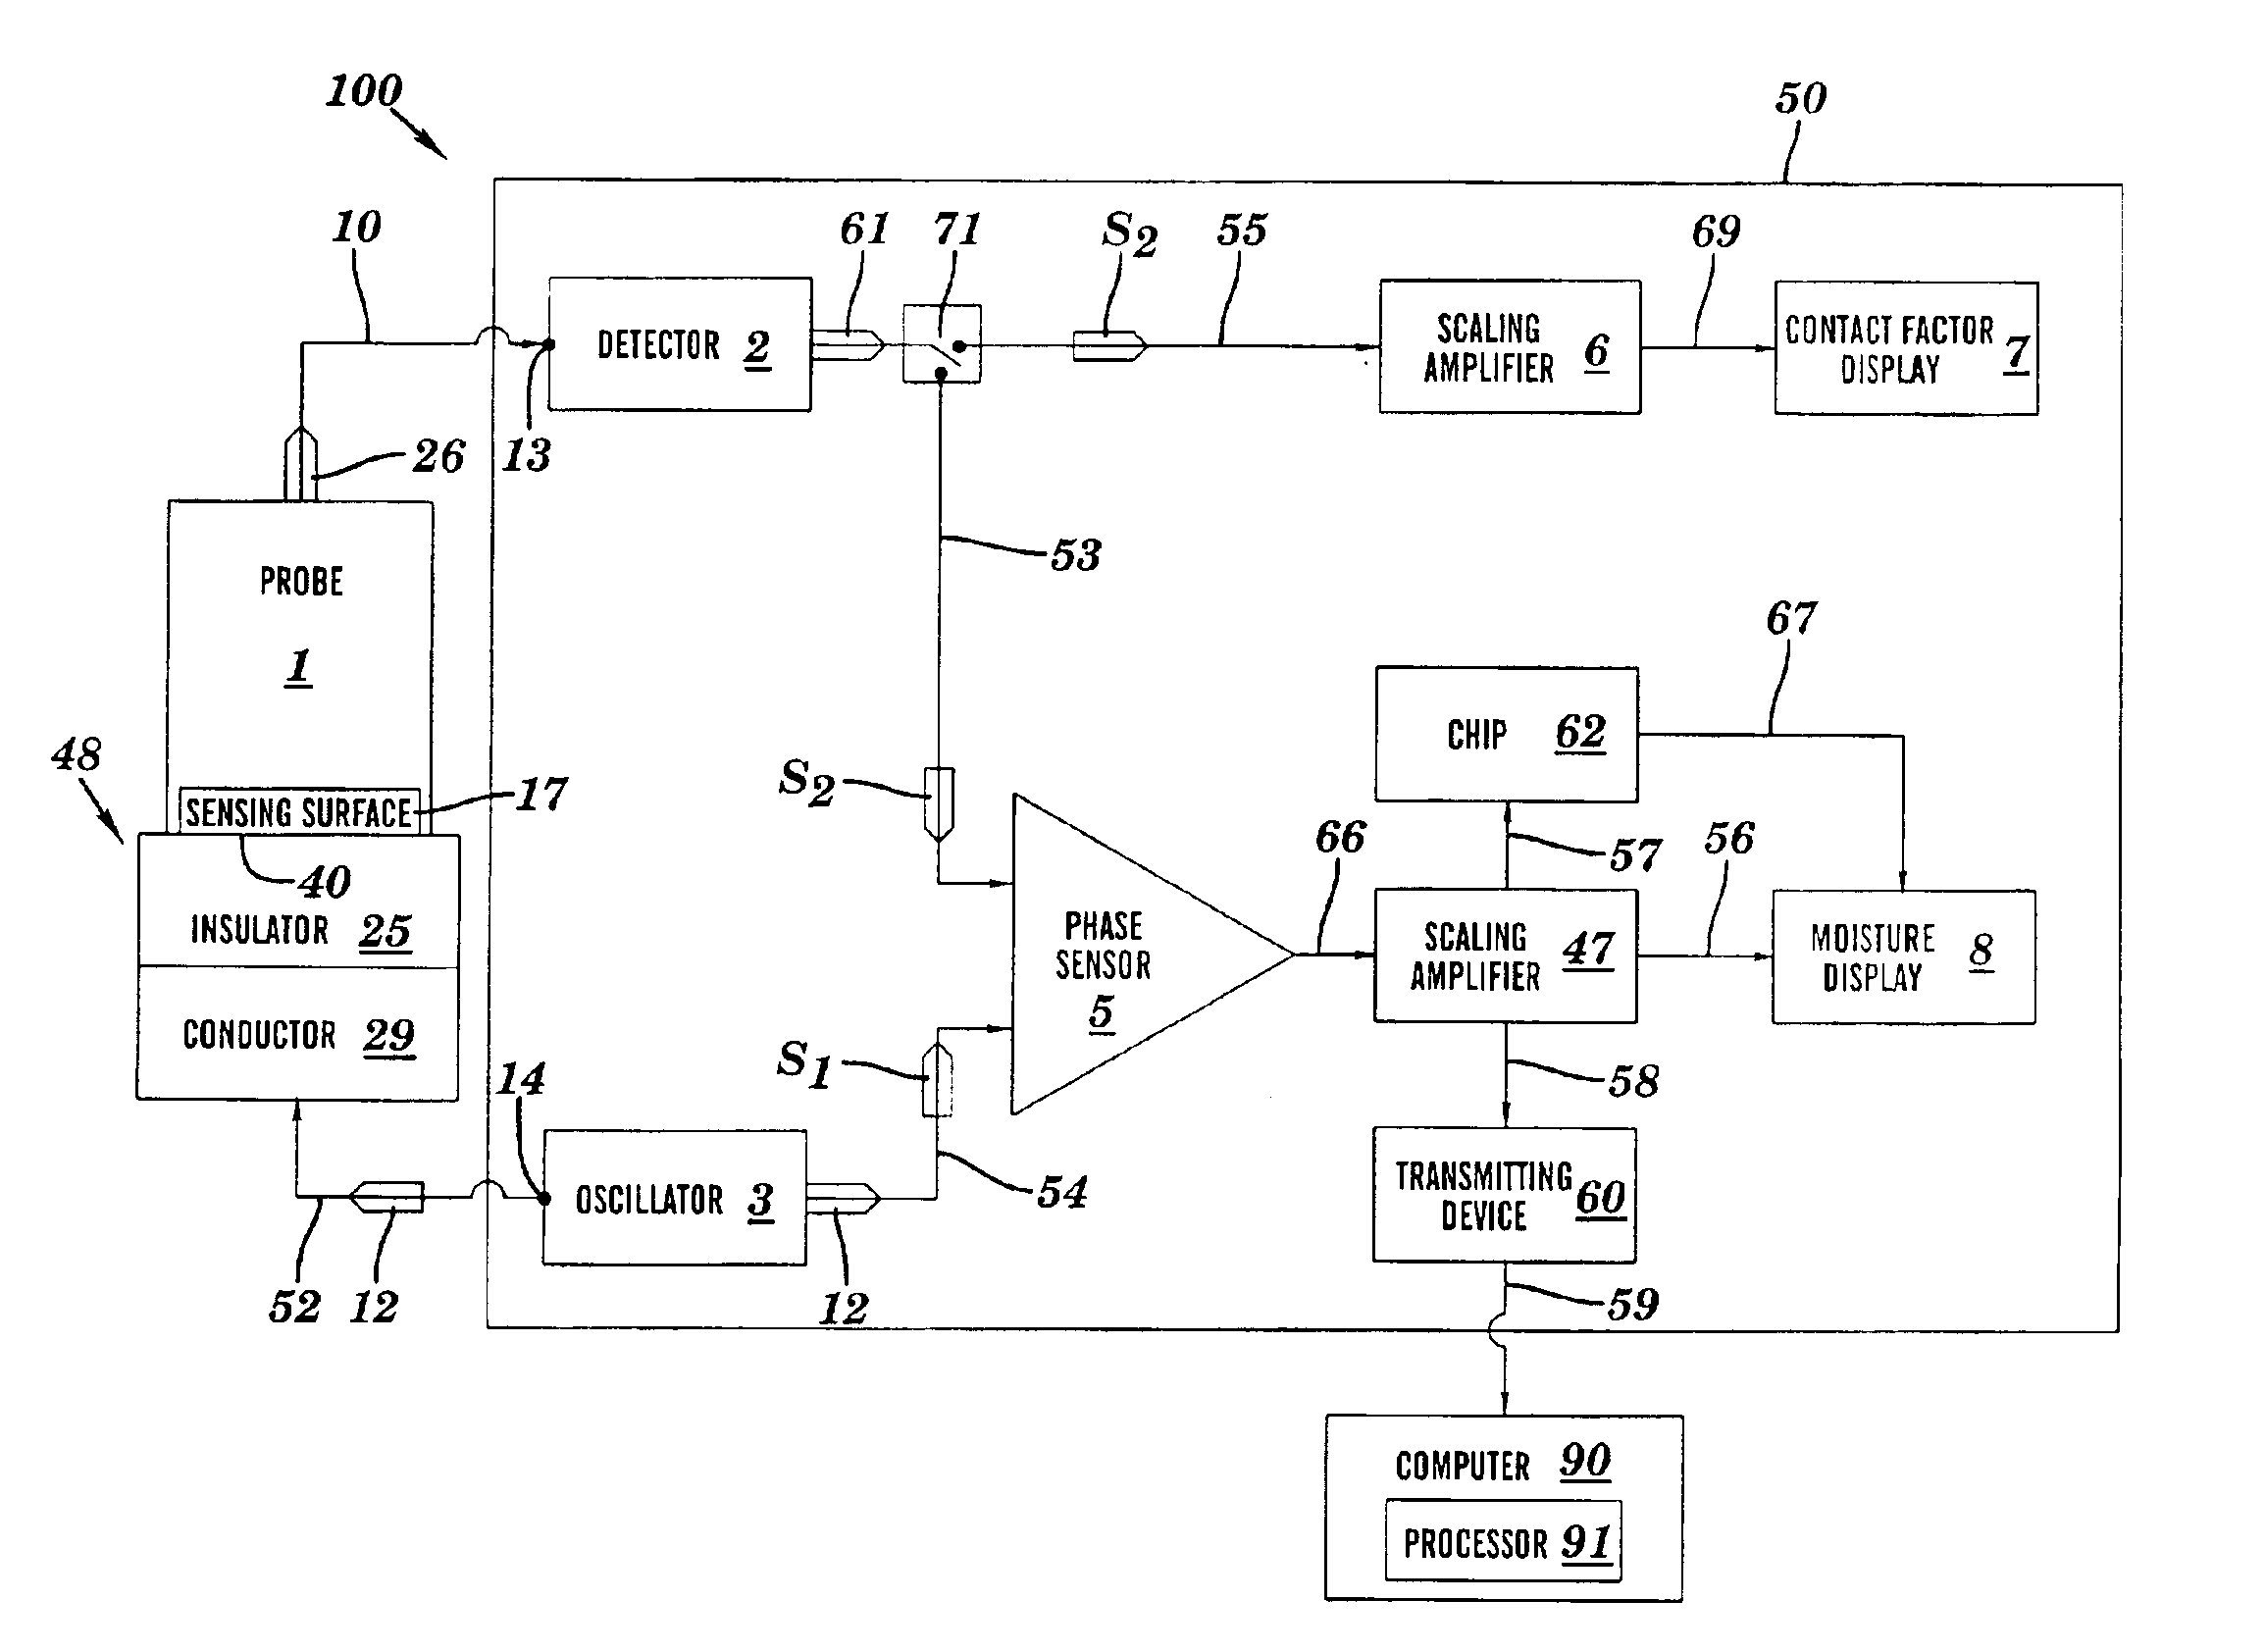 Apparatus and method to detect moisture